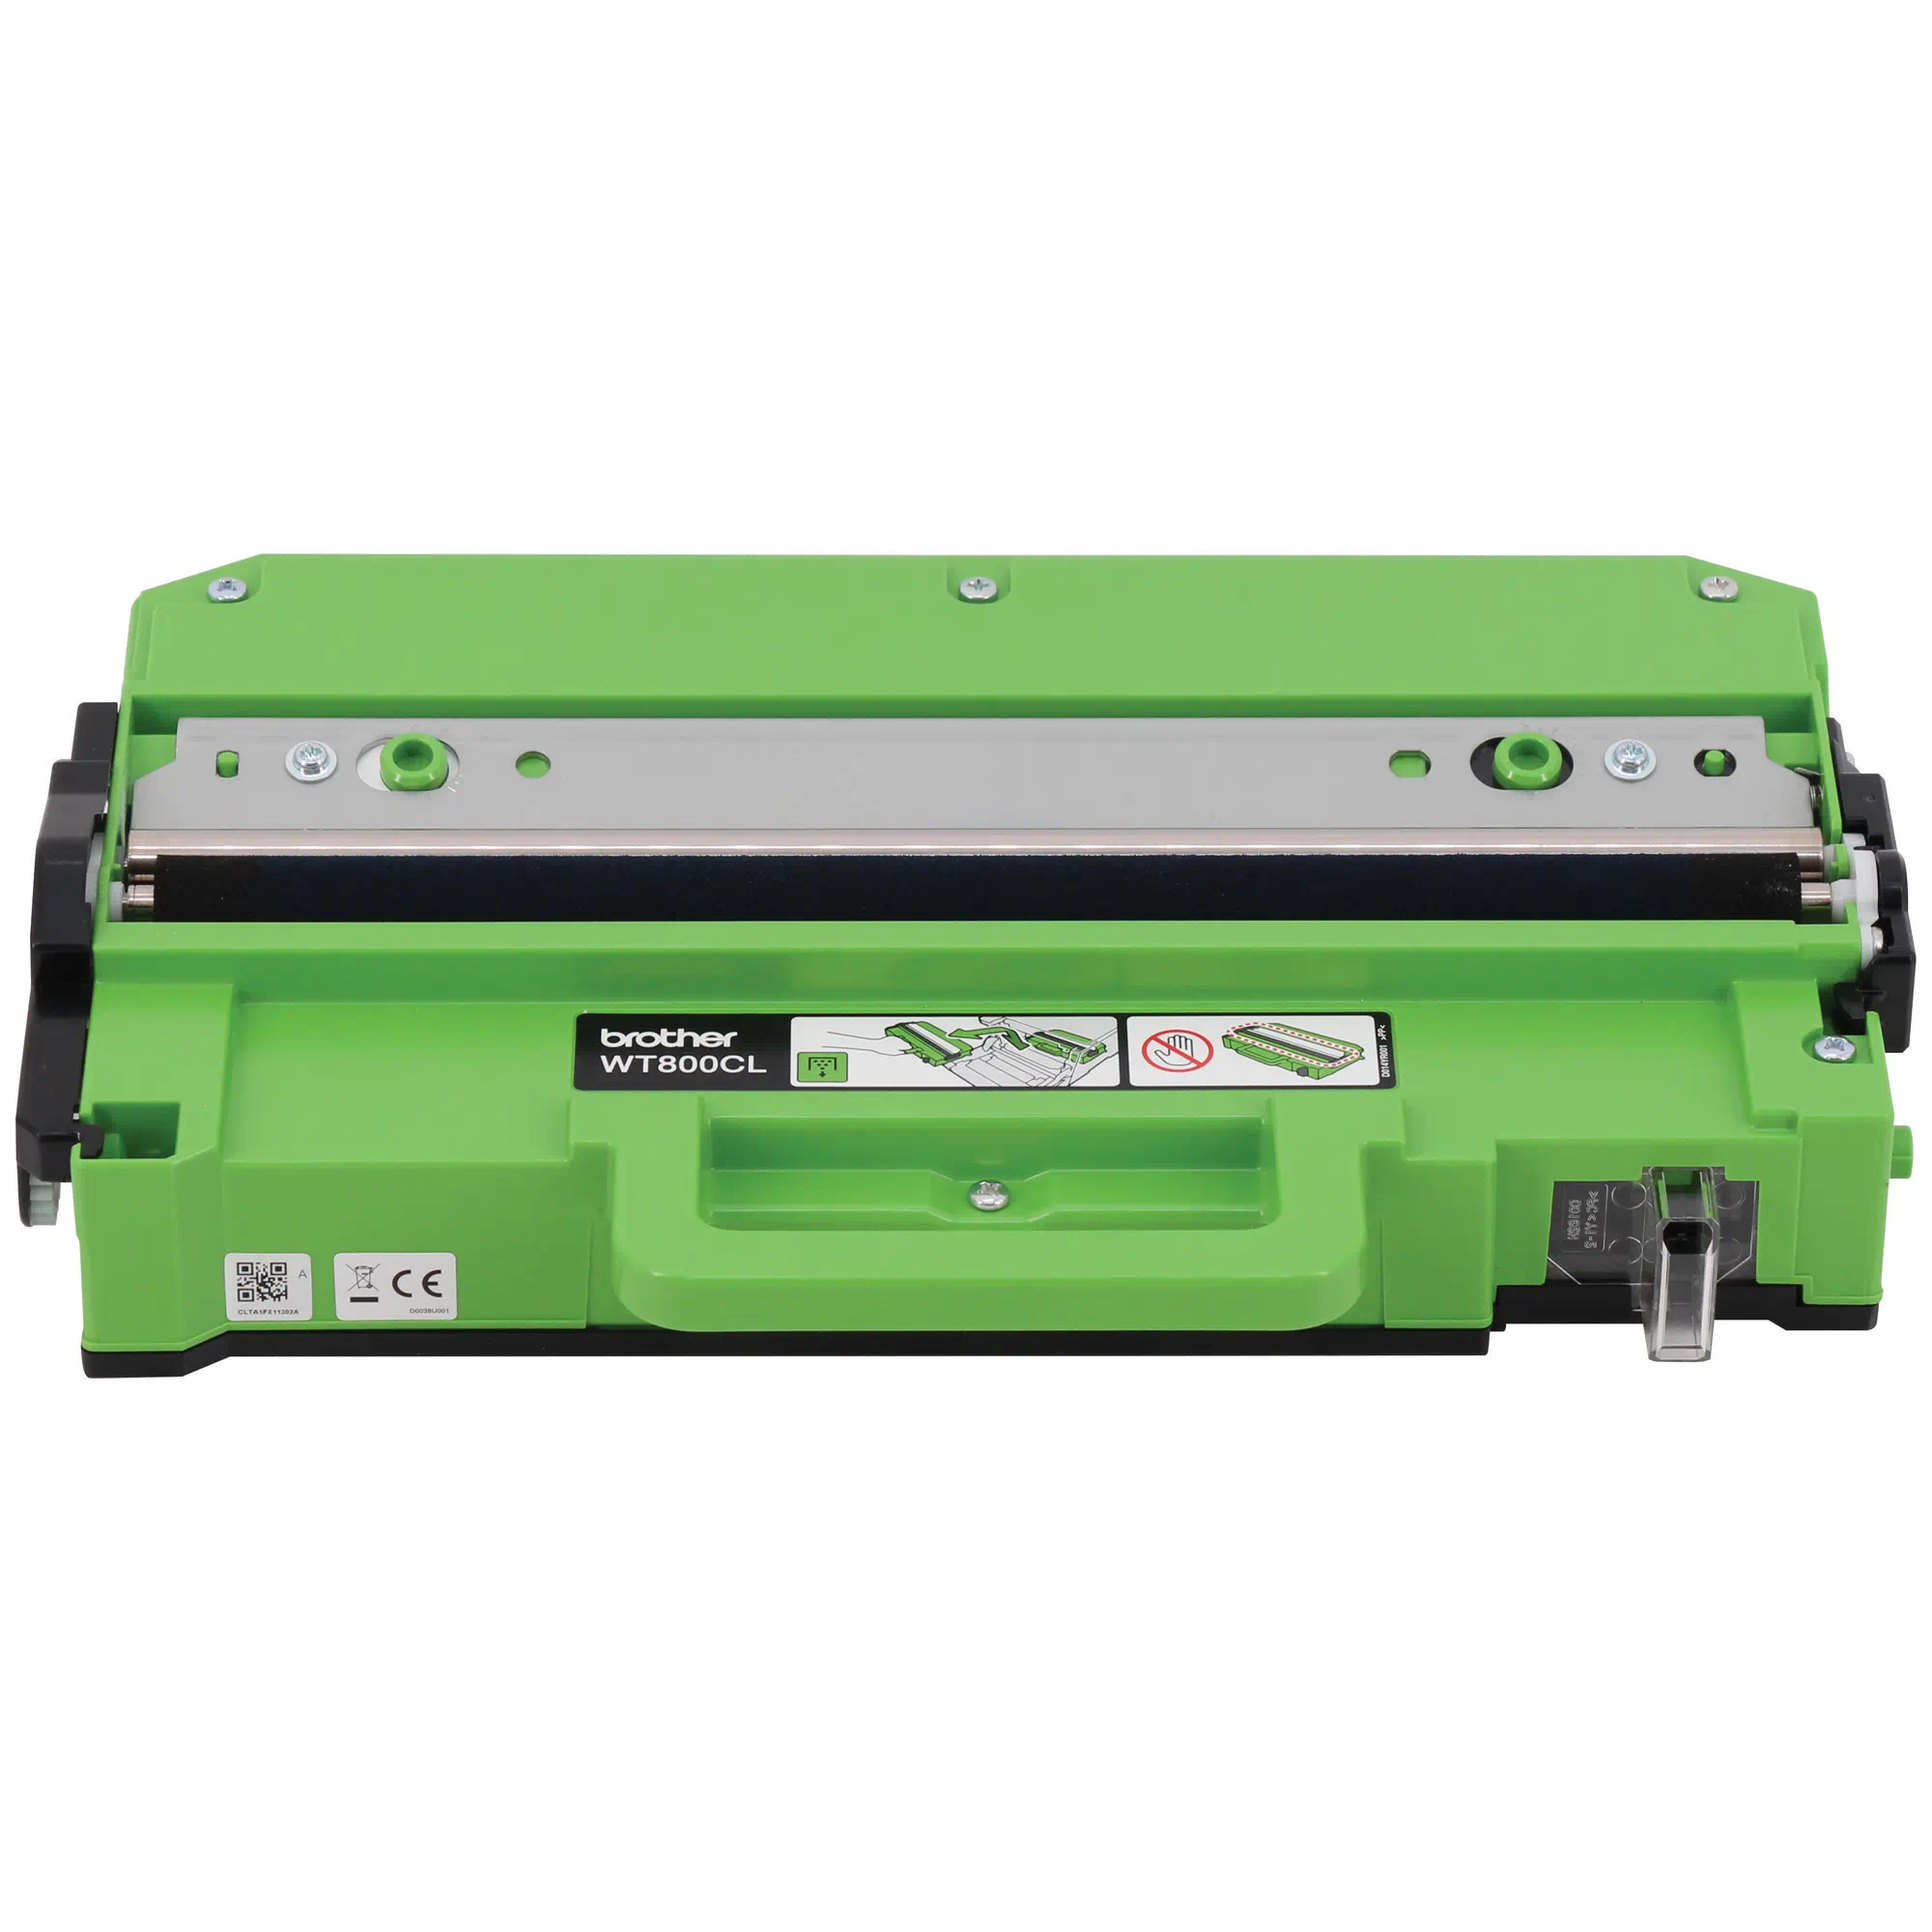 Photos - Ink & Toner Cartridge Brother Waste toner box yields approximately 100,000 pages WT800CL 